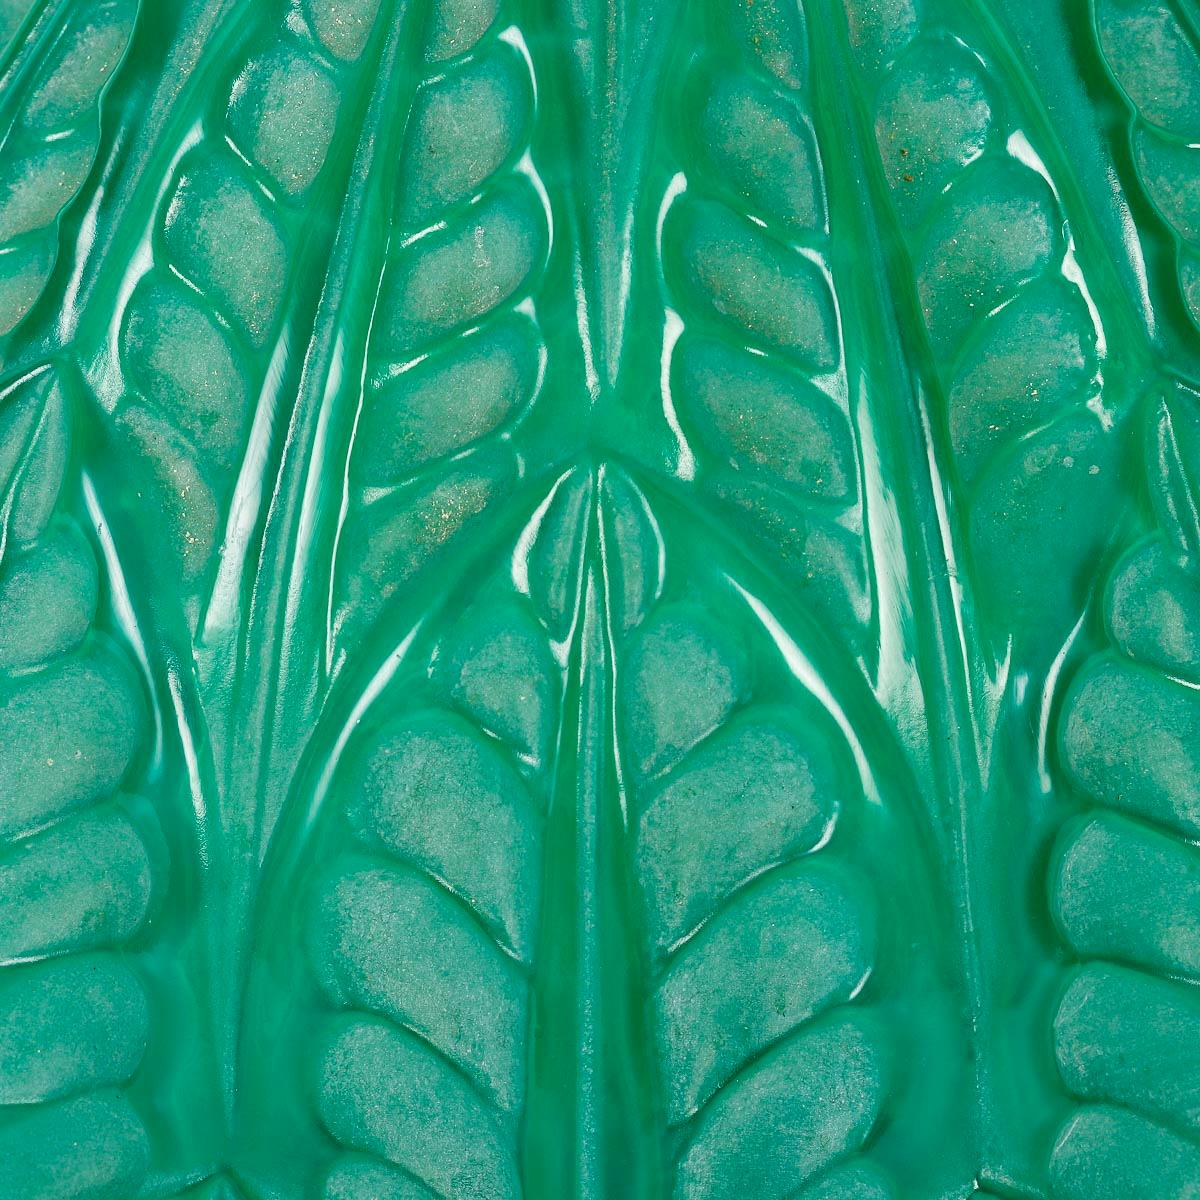 French 1927 René Lalique Vase Malesherbes Jade Peppermint Green Glass White Patina